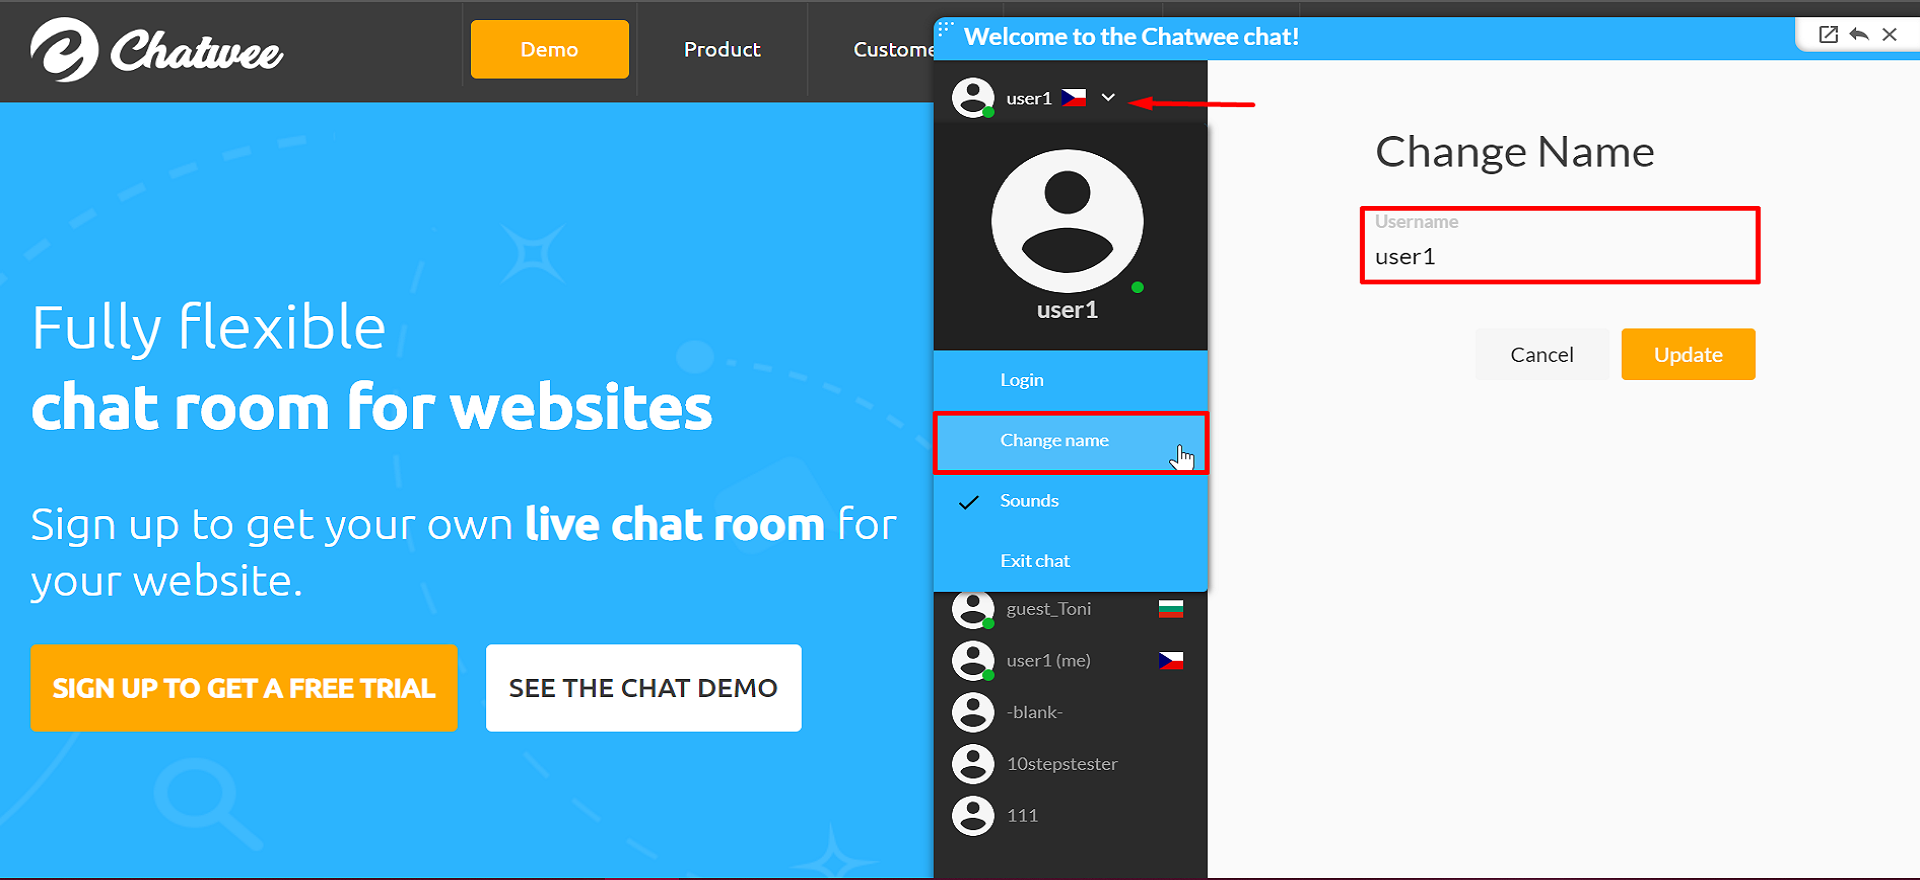 Chatwee live chat guest login users